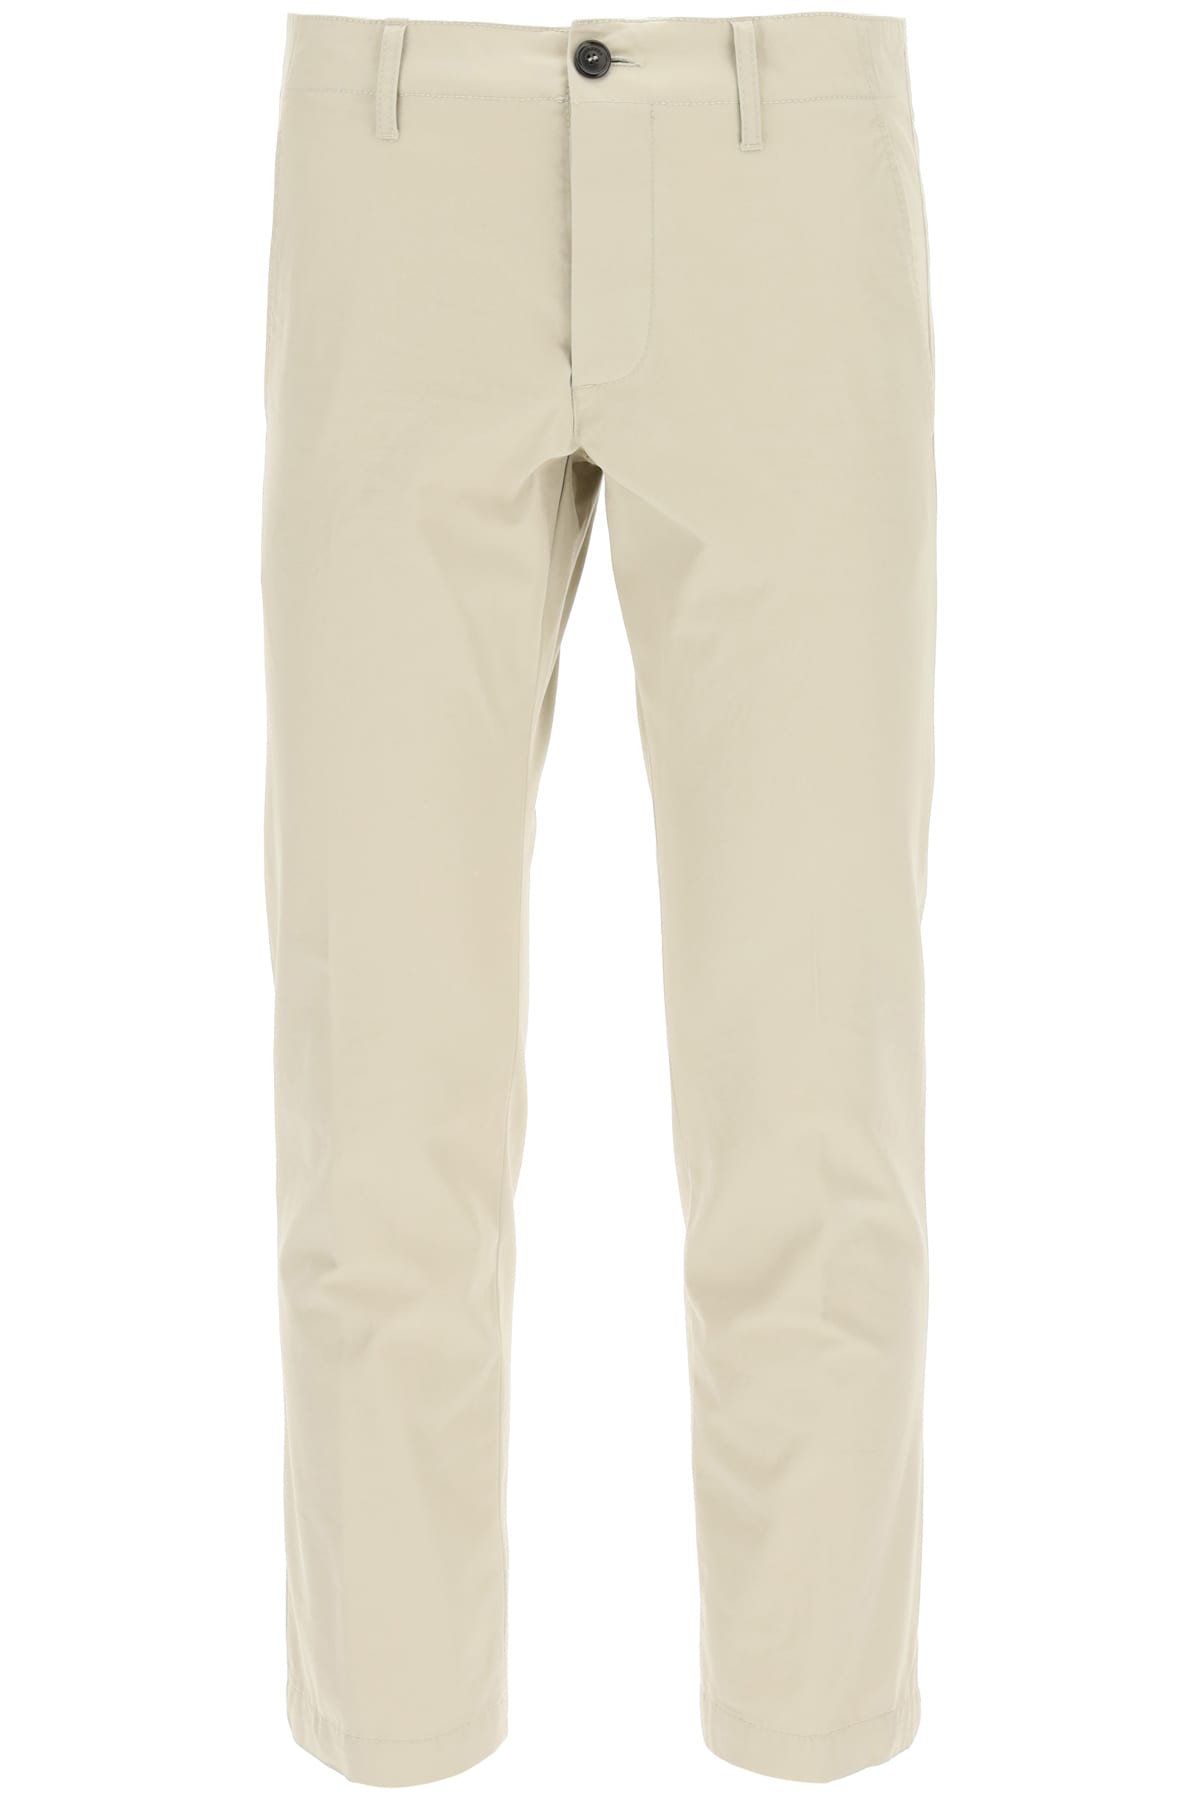 Dsquared2 Cool Guy Chino Trousers